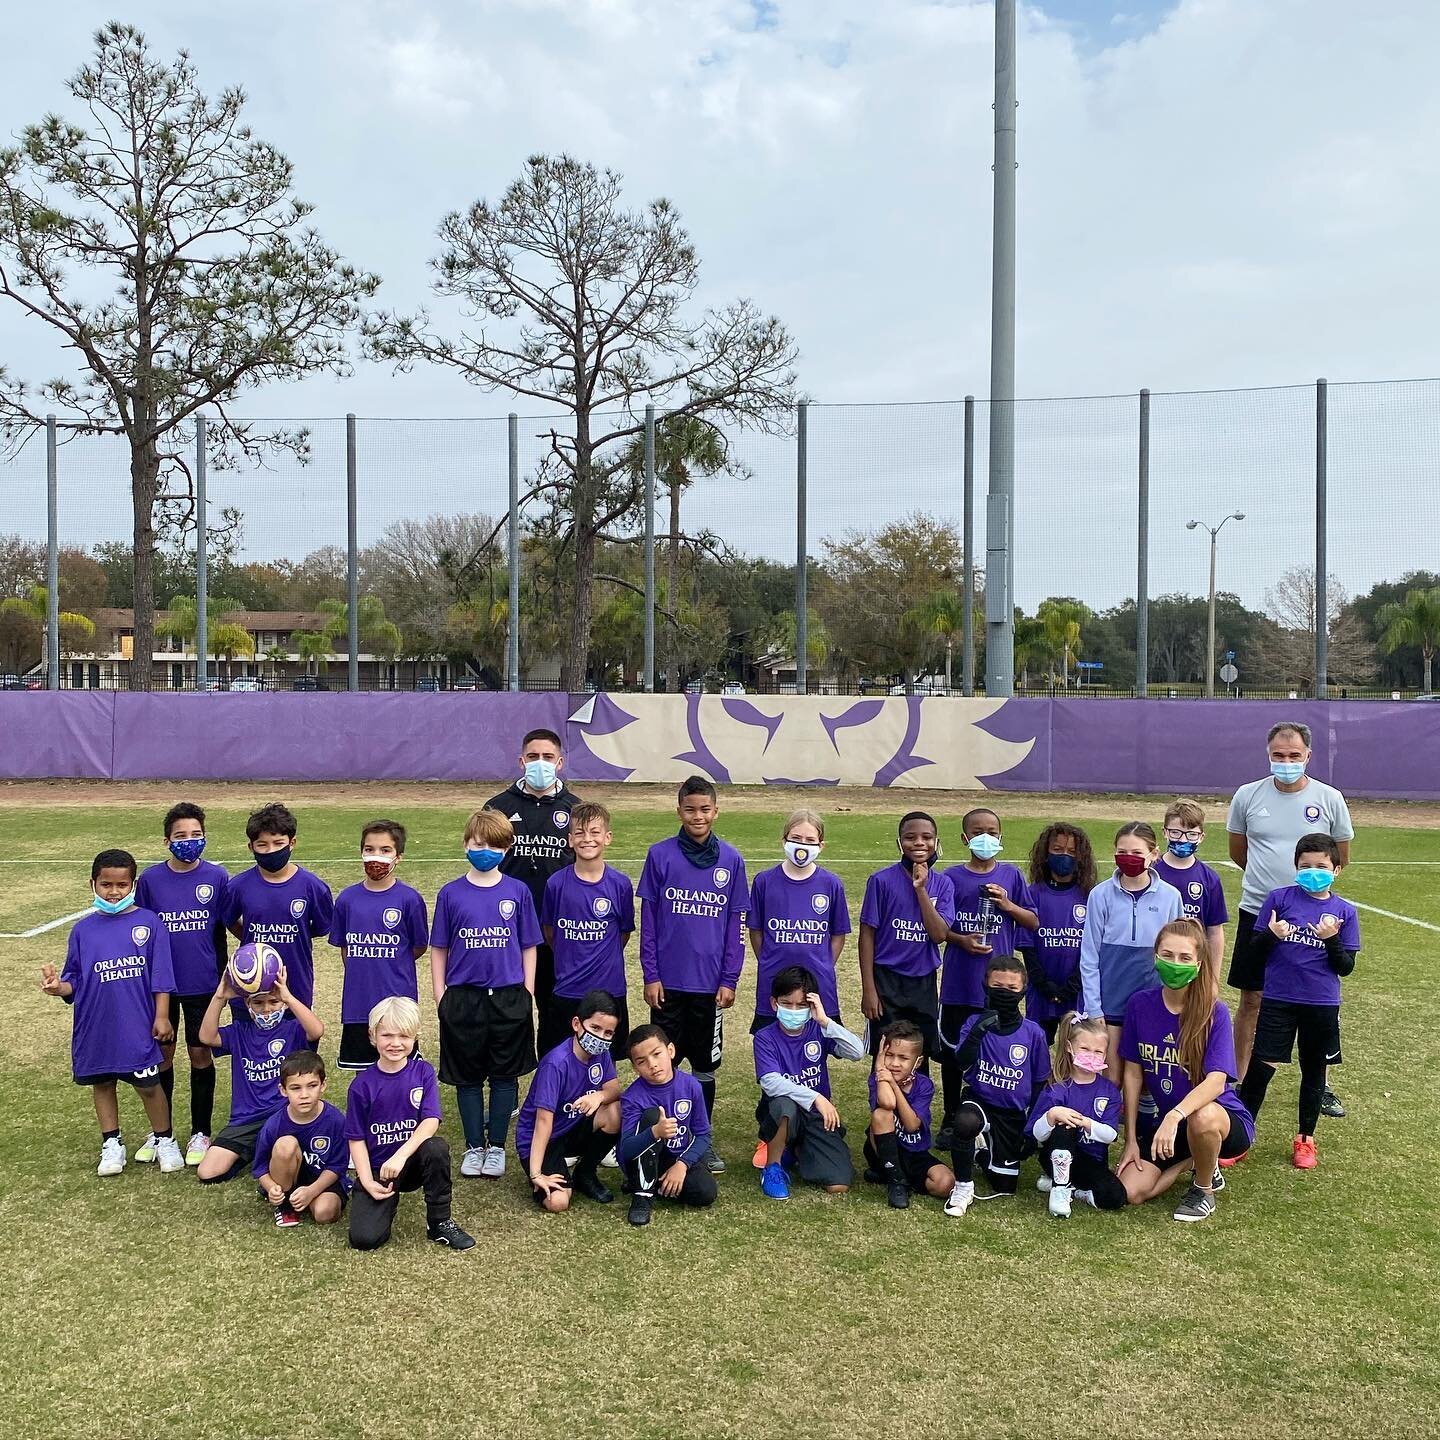 Thank you everyone for coming! 🙌⚽️ A great day full of drills, soccer, and yoga ✅ We&rsquo;ll see everyone next week! #TheFutureisPurple